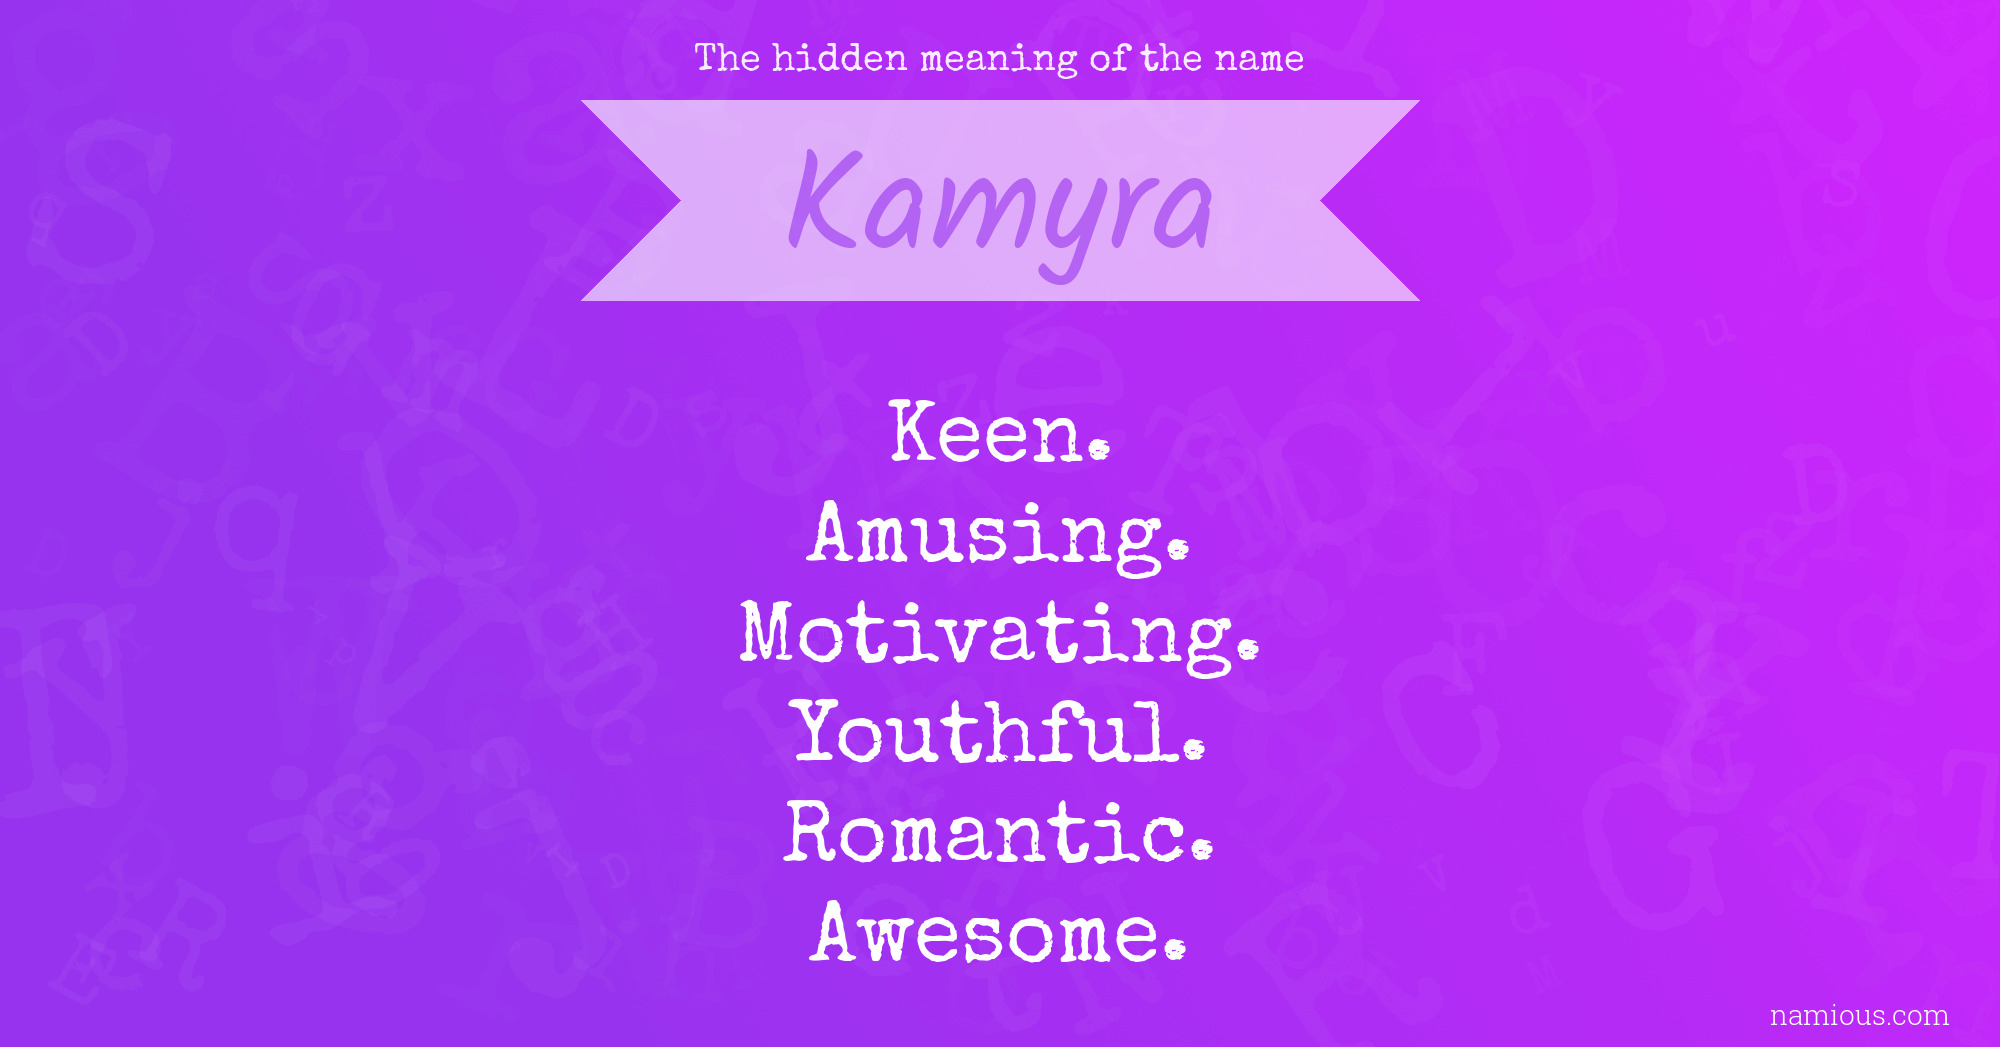 The hidden meaning of the name Kamyra